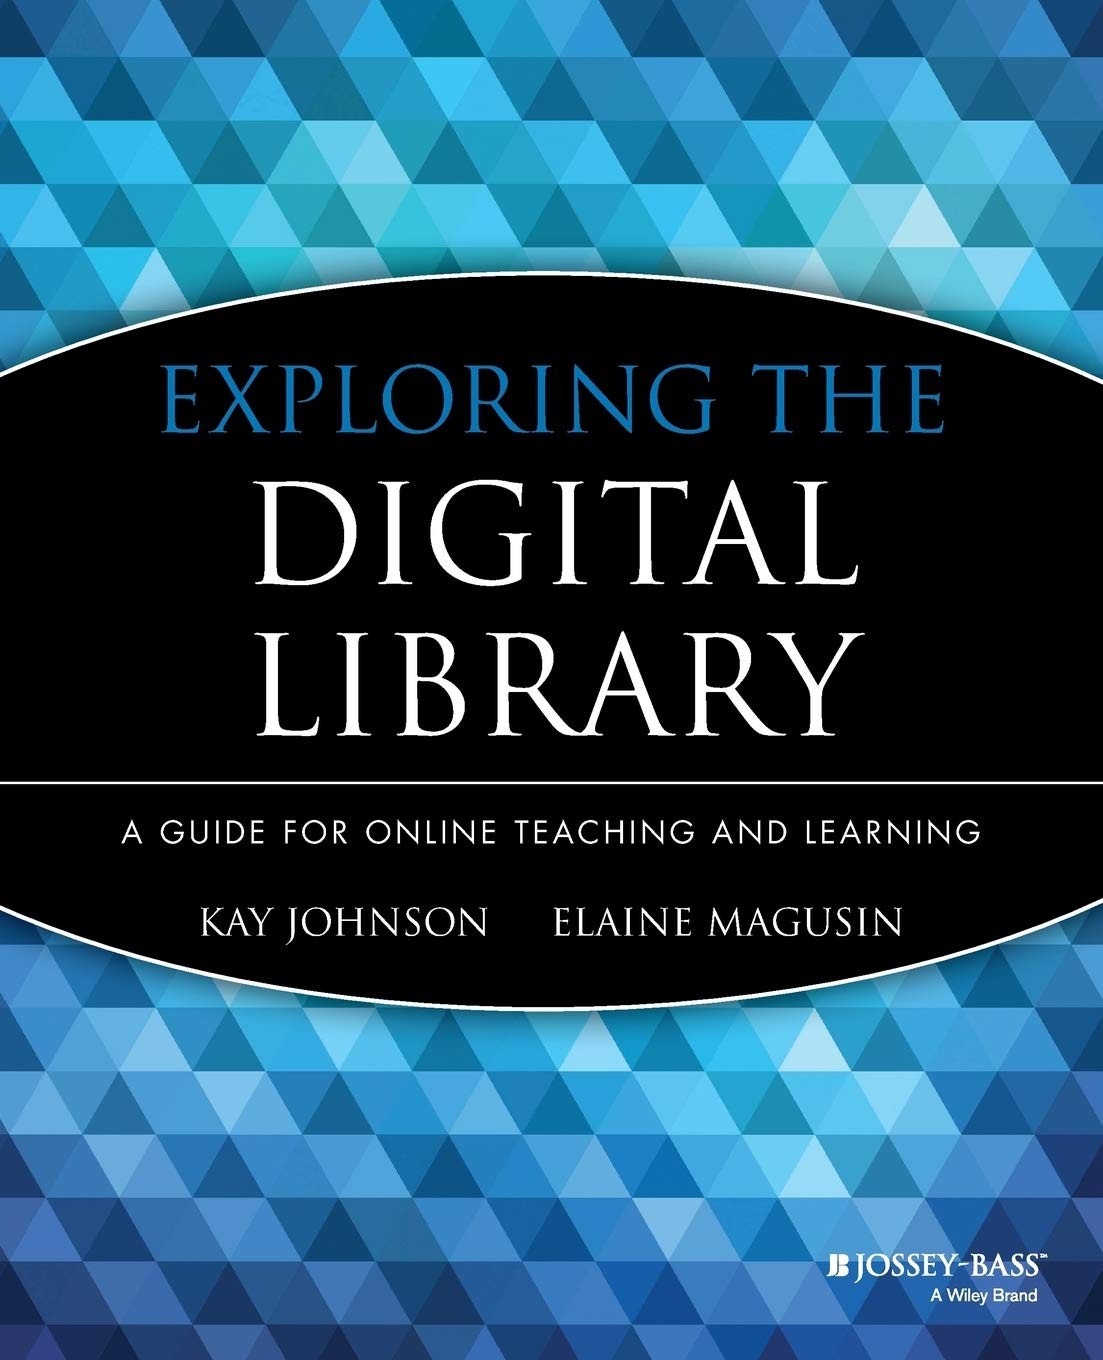 Exploring the Digital Library: A Guide for Online Teaching and Learning